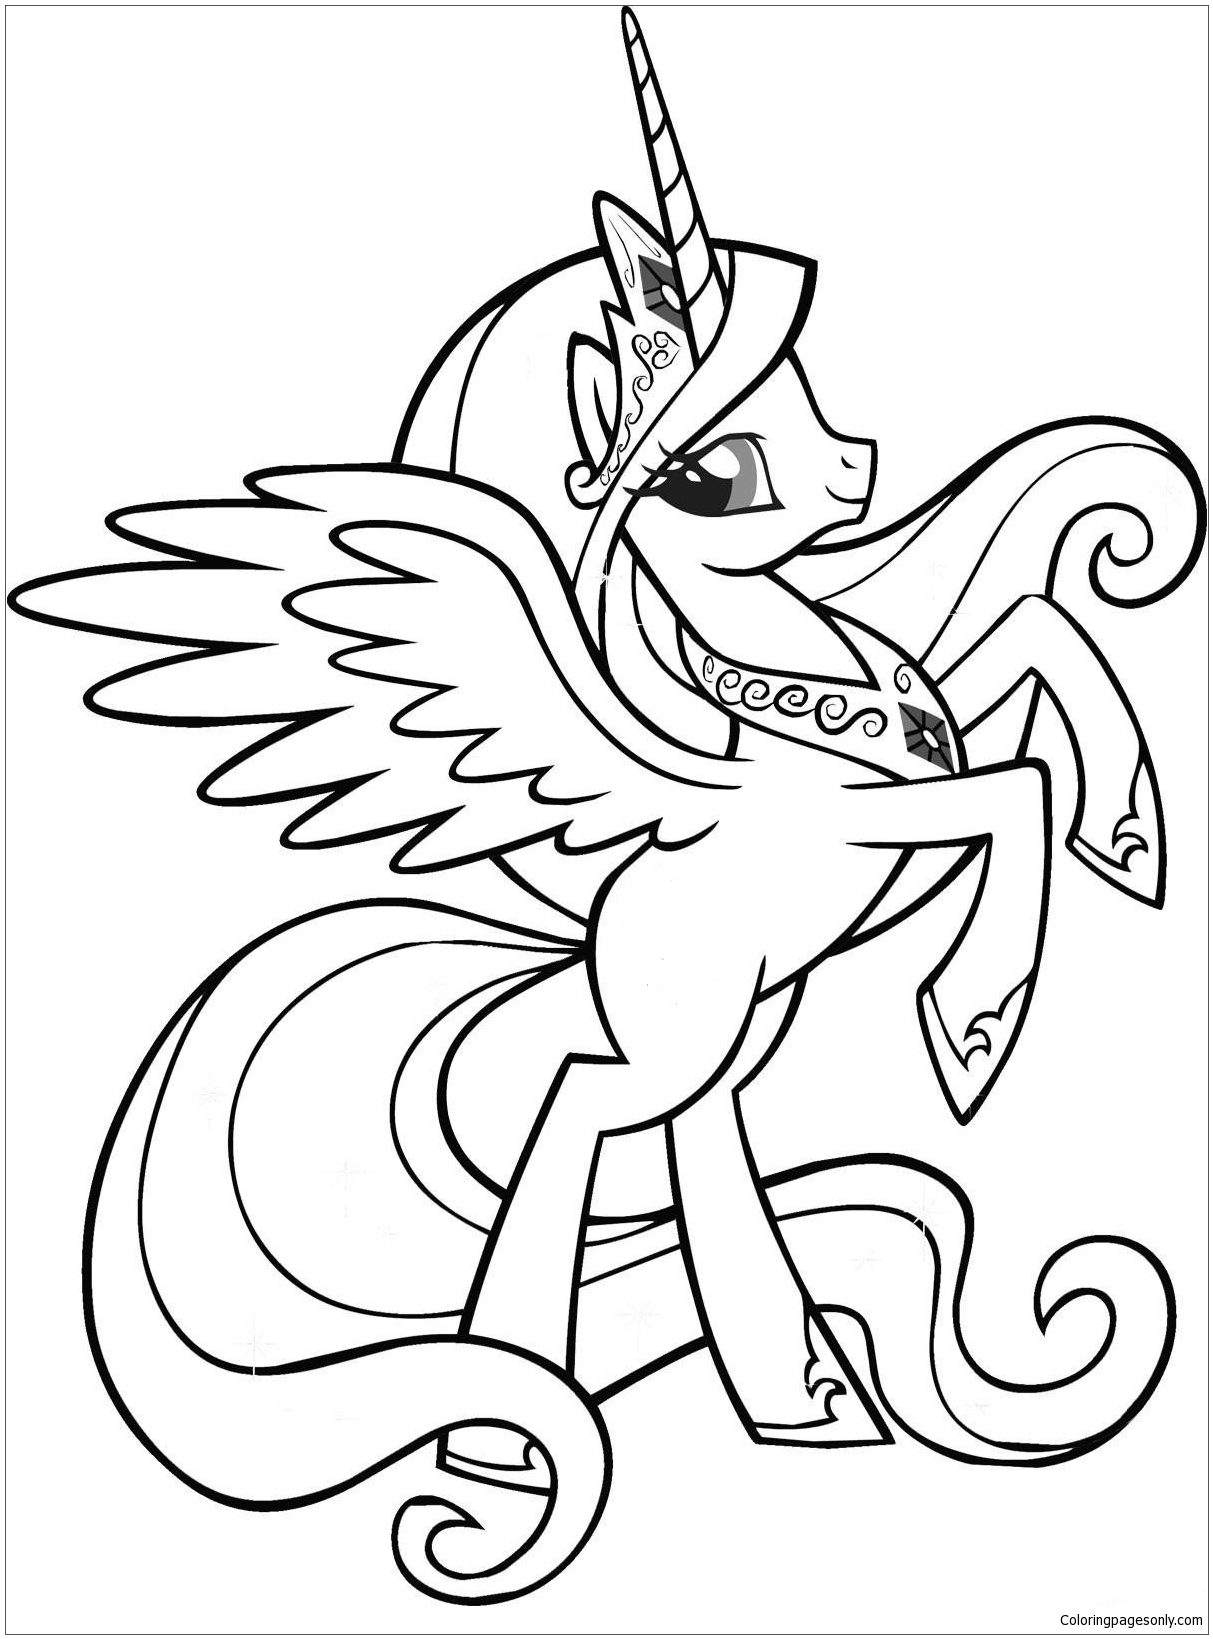  Cute  Unicorn  image 4 Coloring  Pages  Cartoons Coloring  